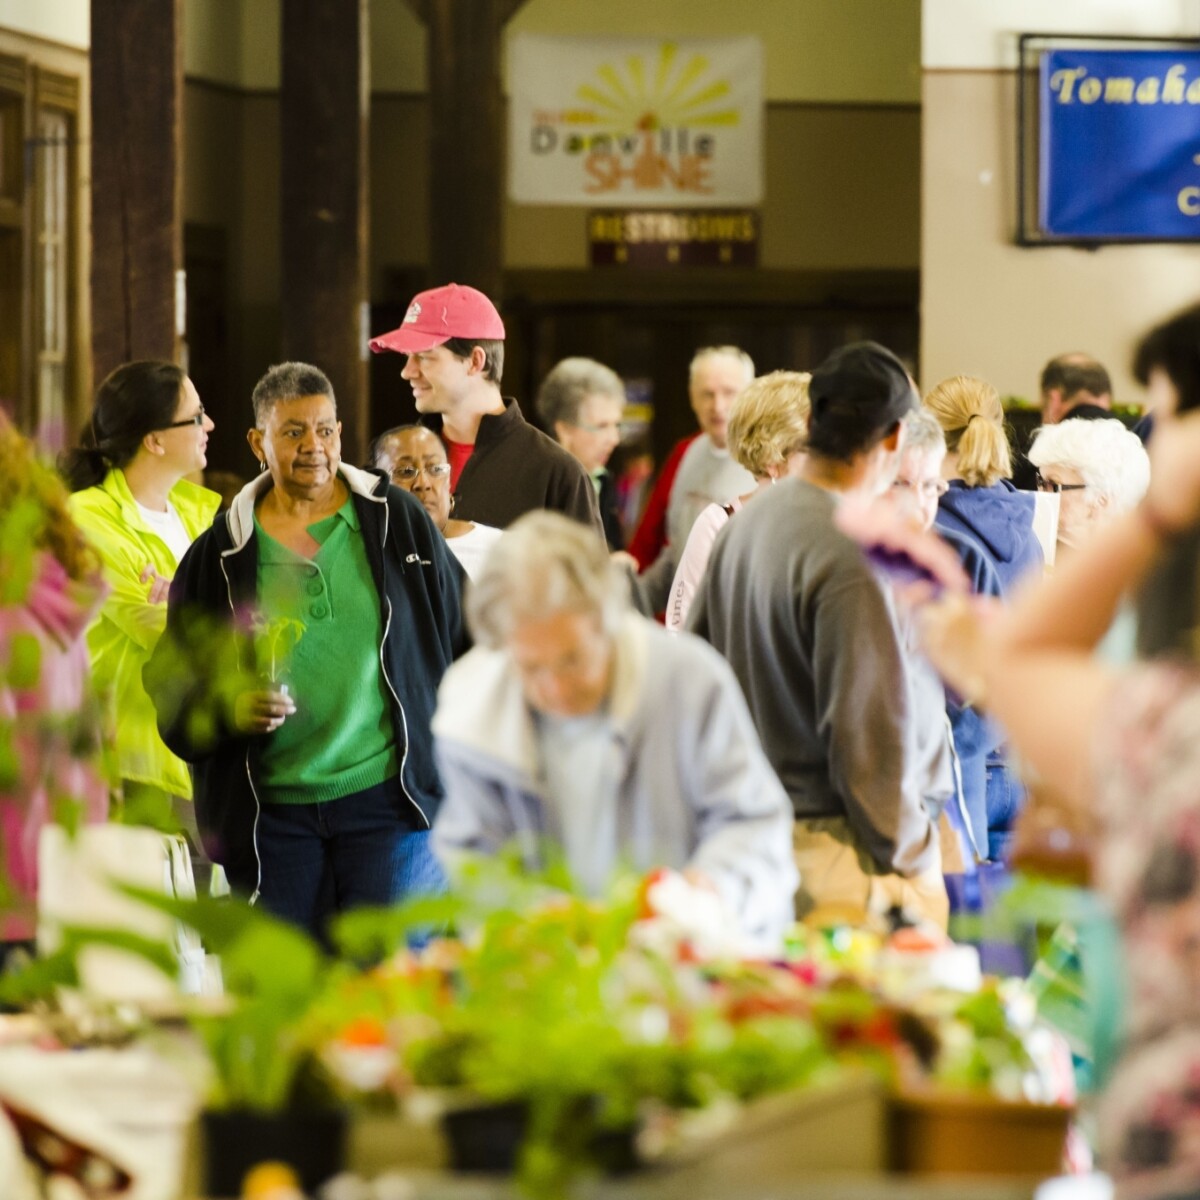 People shopping at an indoor farmers market.